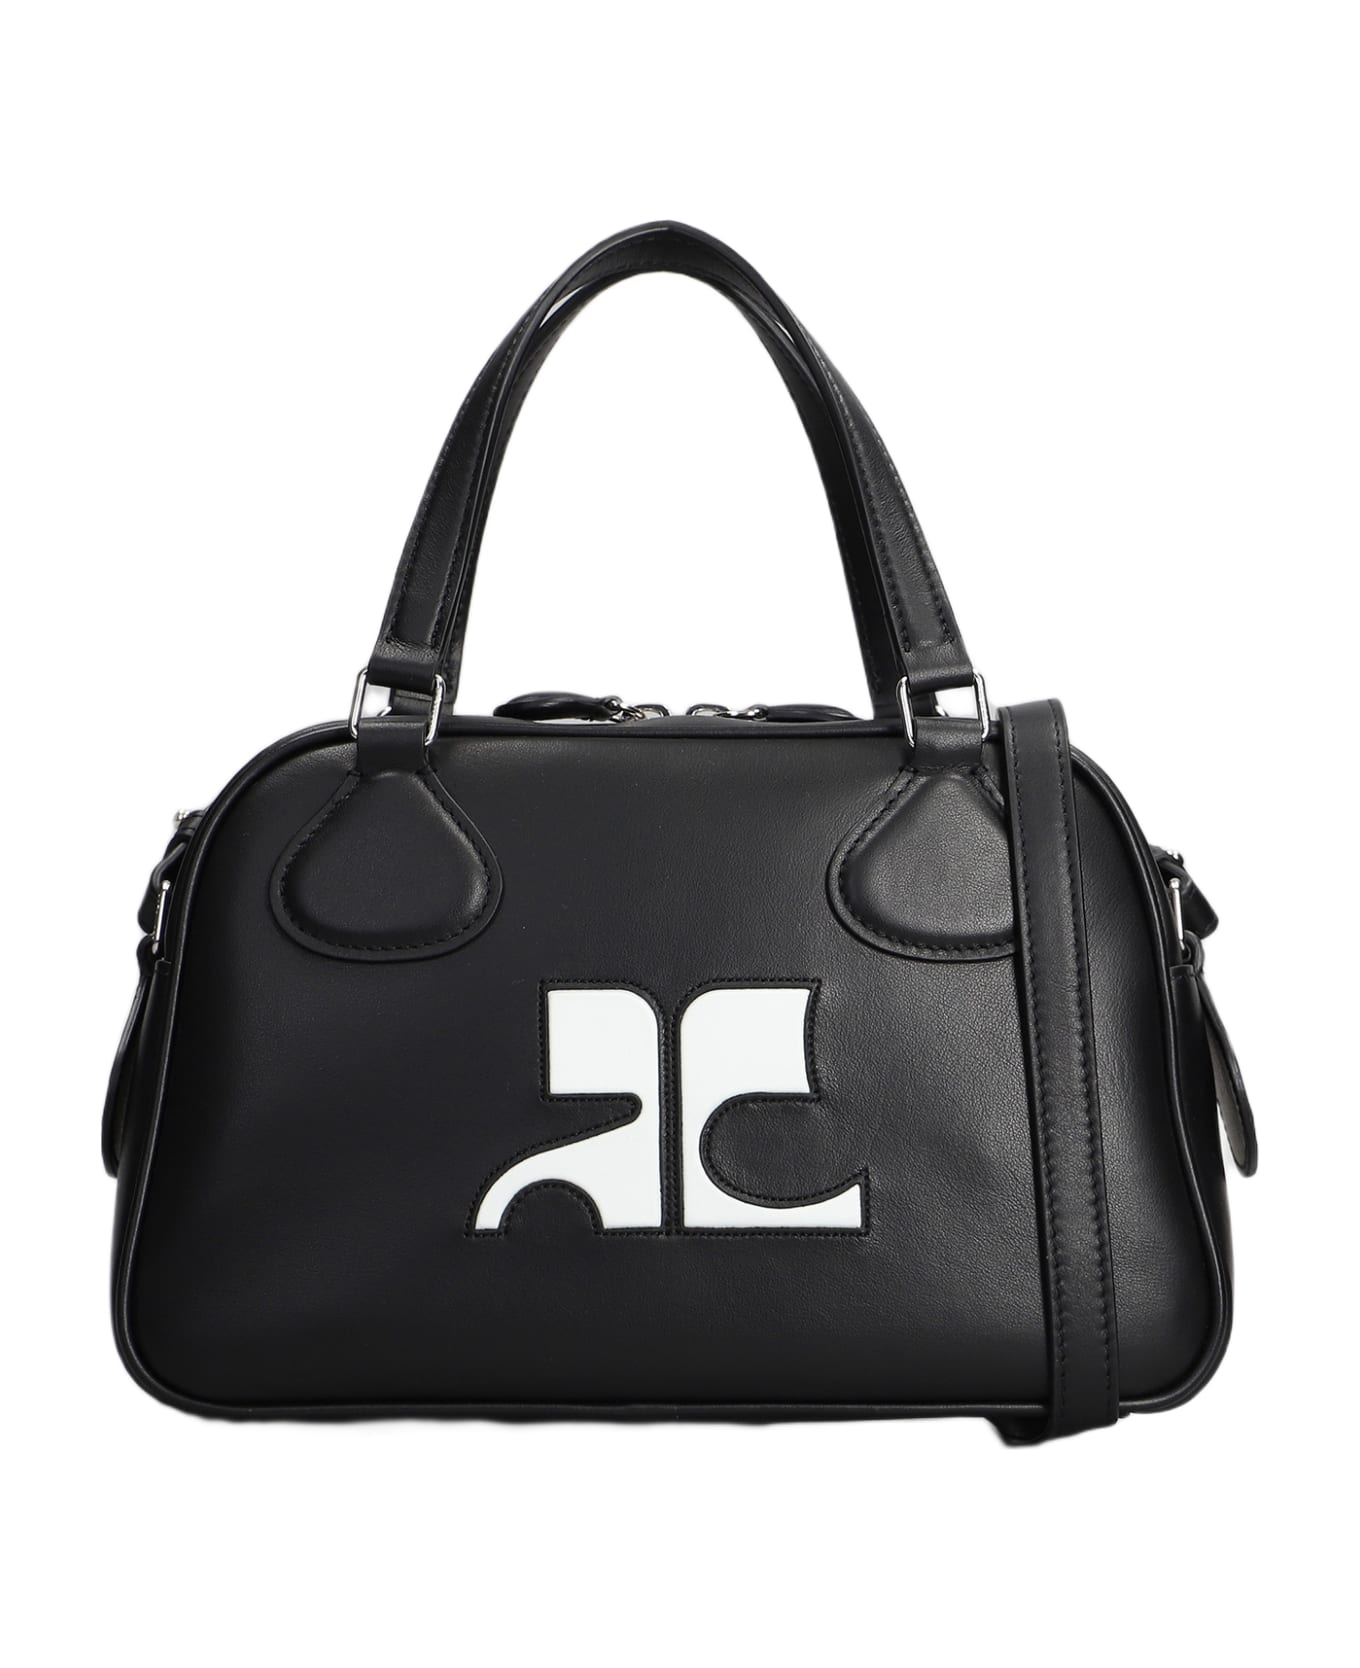 Courrèges Bowling Hand Bag In Black Leather - black